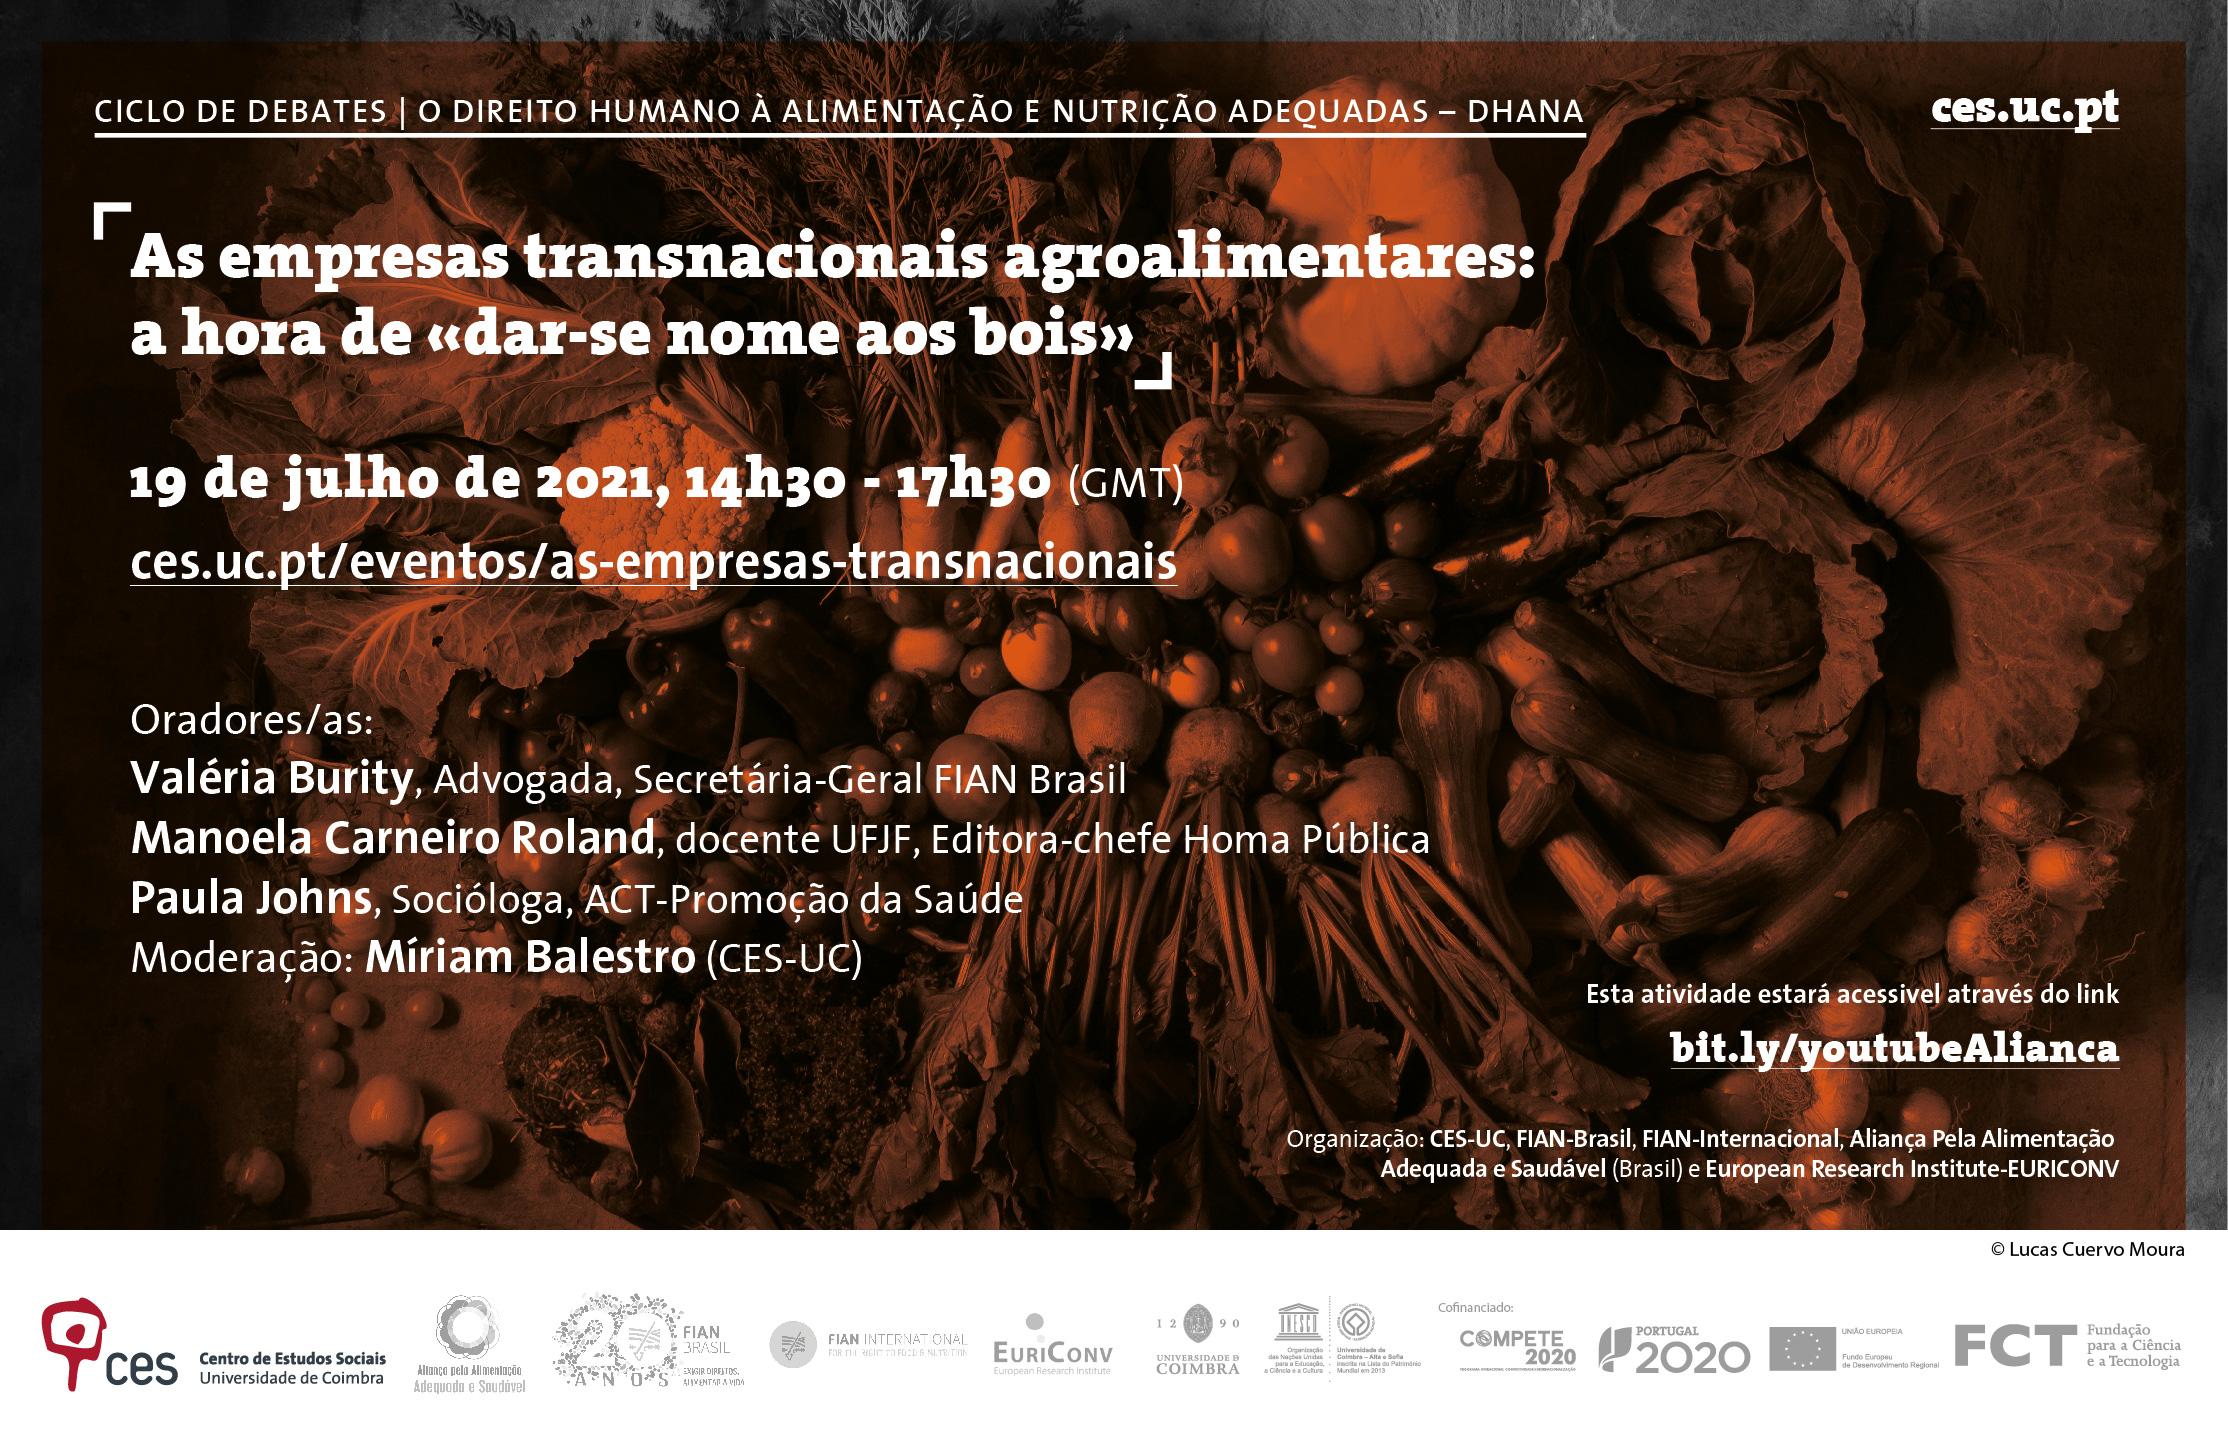 Transnational agrifood companies: time to «tell it like it is»<span id="edit_34566"><script>$(function() { $('#edit_34566').load( "/myces/user/editobj.php?tipo=evento&id=34566" ); });</script></span>